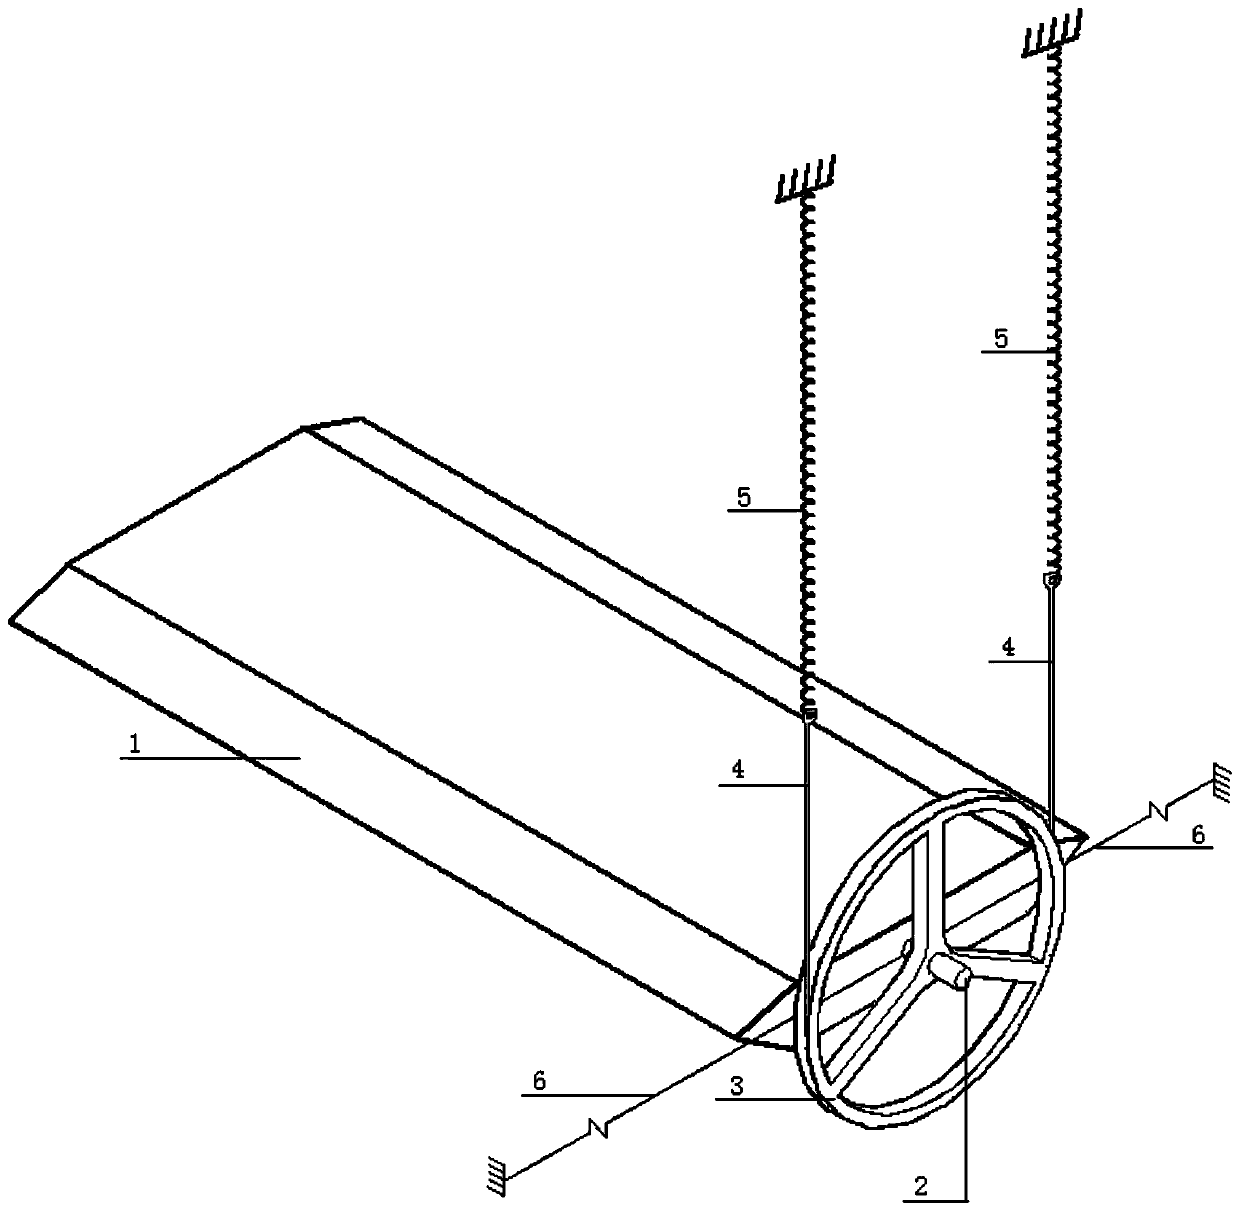 A bridge vertical and torsional coupled large-amplitude free vibration wind tunnel test device